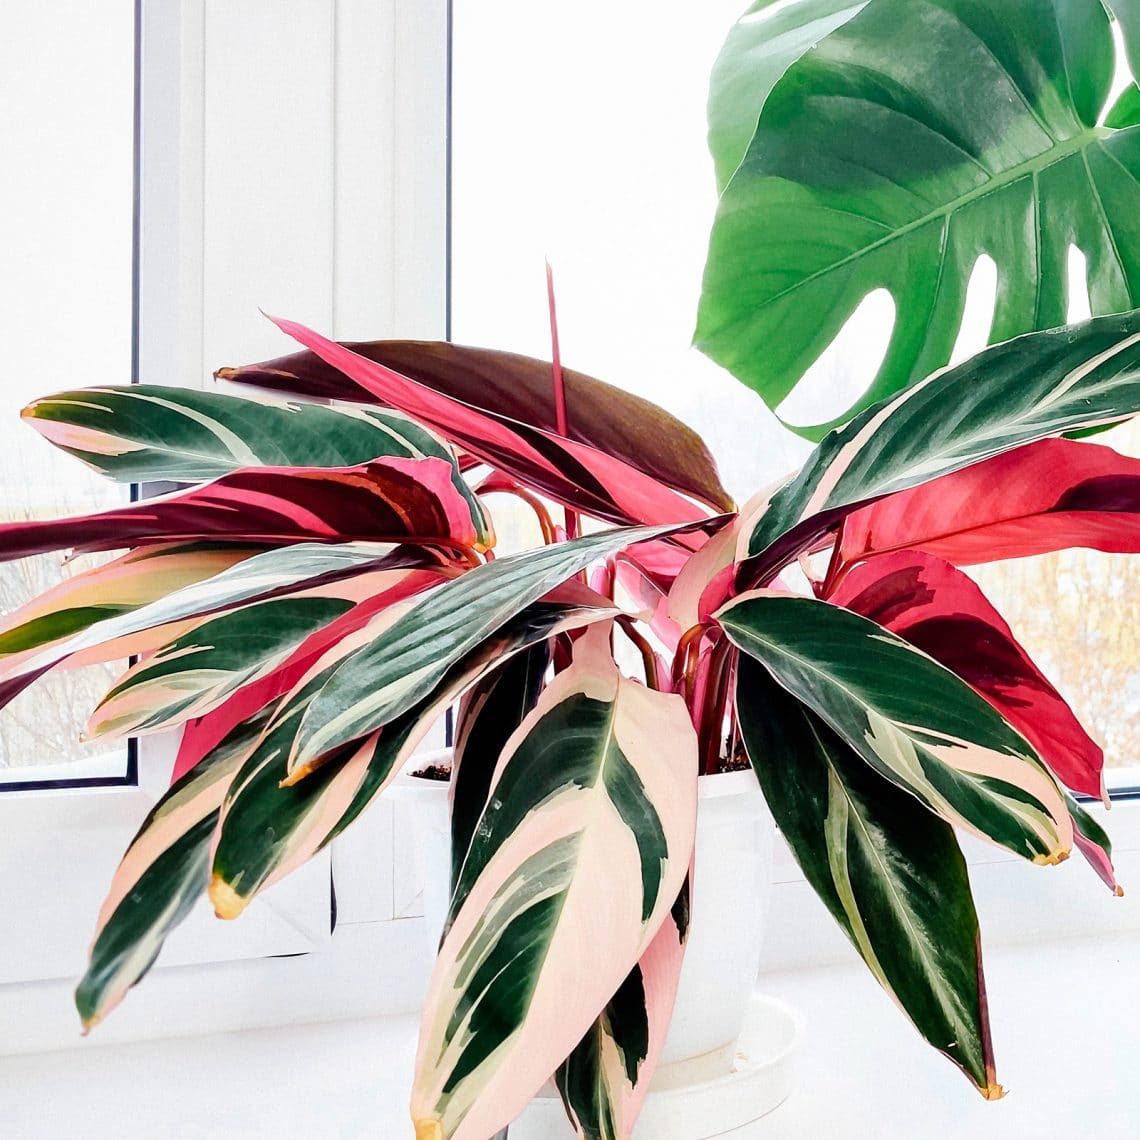 Stromanthe Triostar: easy care tips for this striking pink-streaked houseplant